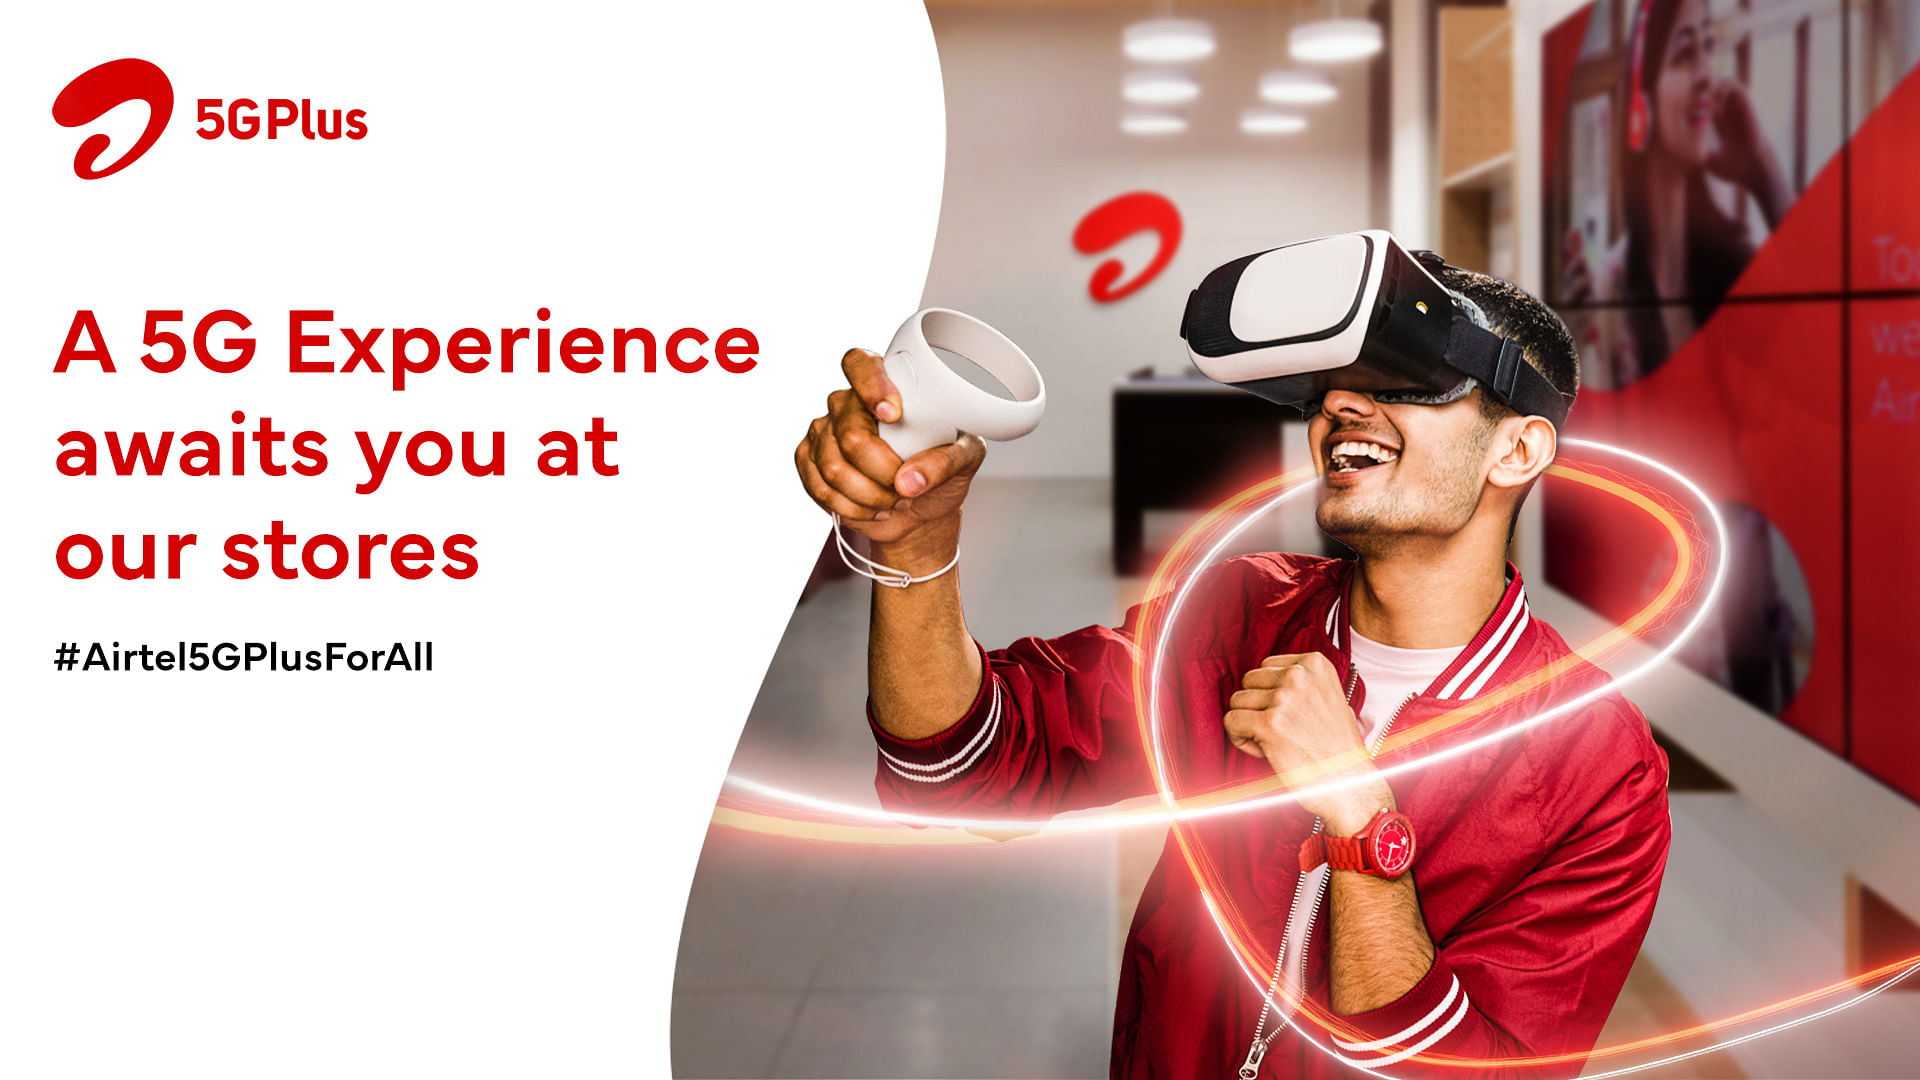 <div class="paragraphs"><p>Airtel invites customers to experience the power of 5G at its stores</p></div>